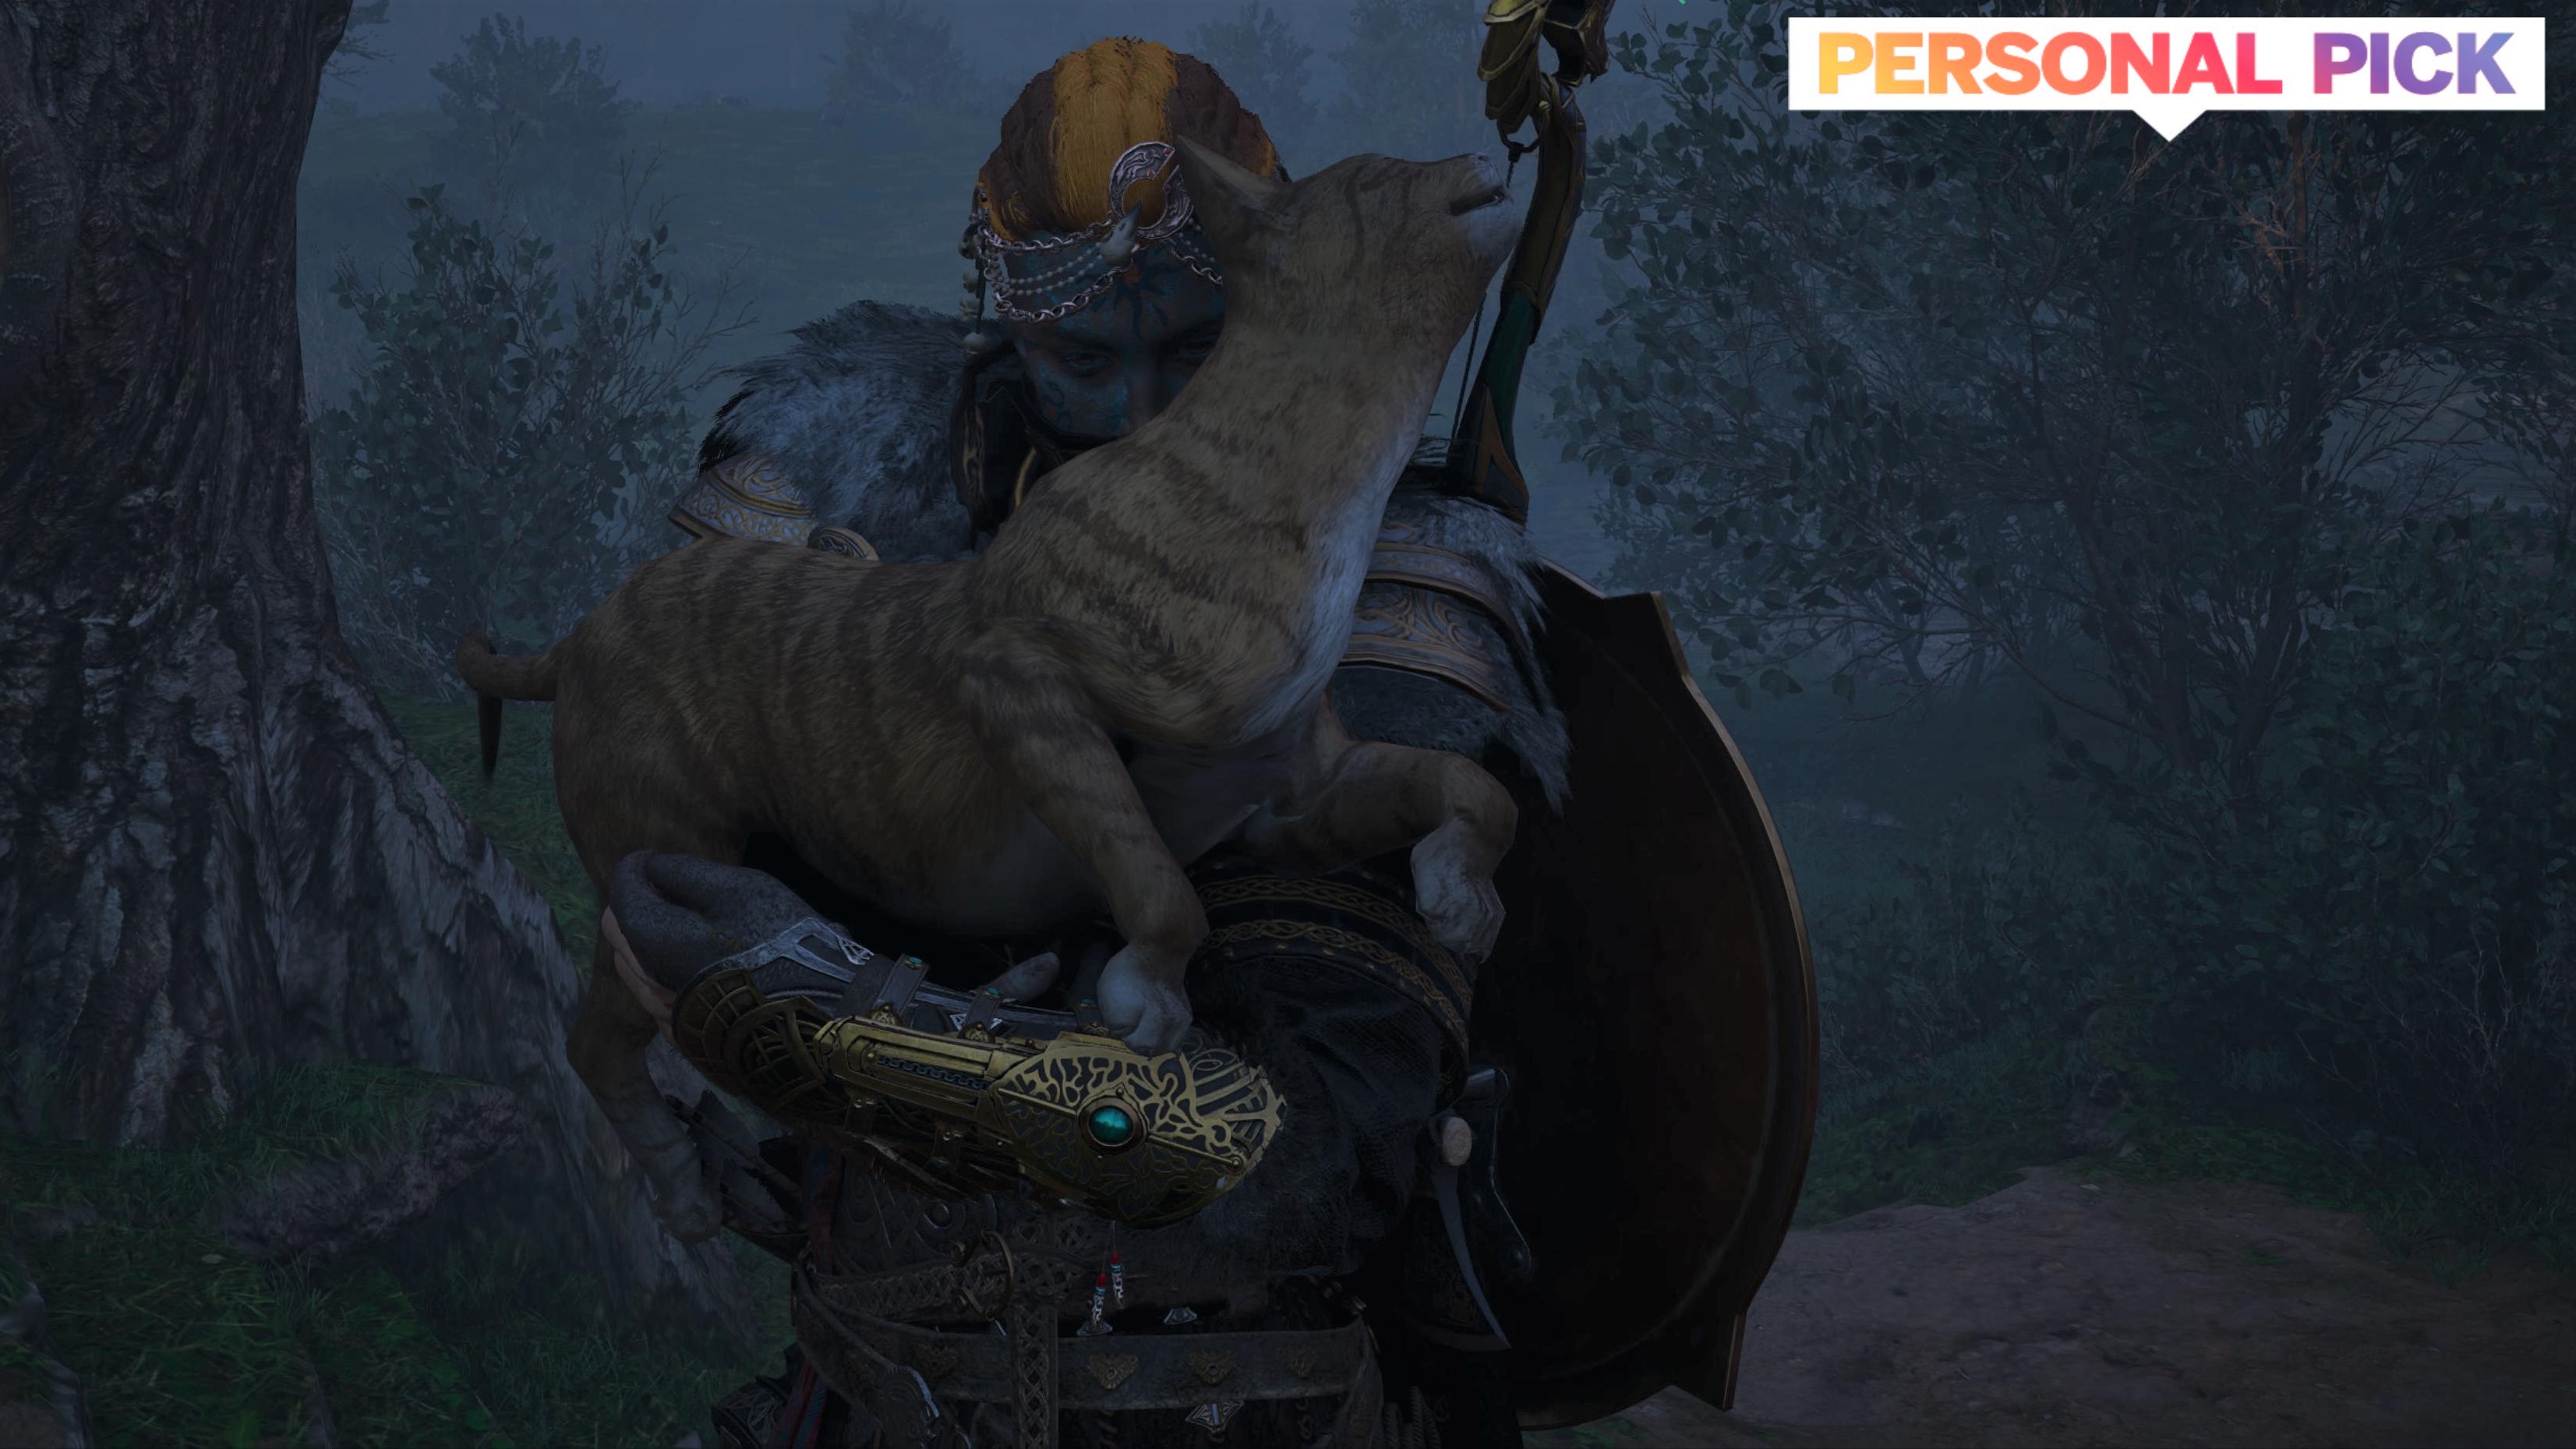 Assassin's Creed: Valhalla's DLC takes Eivor to fight beasts of a different  nature